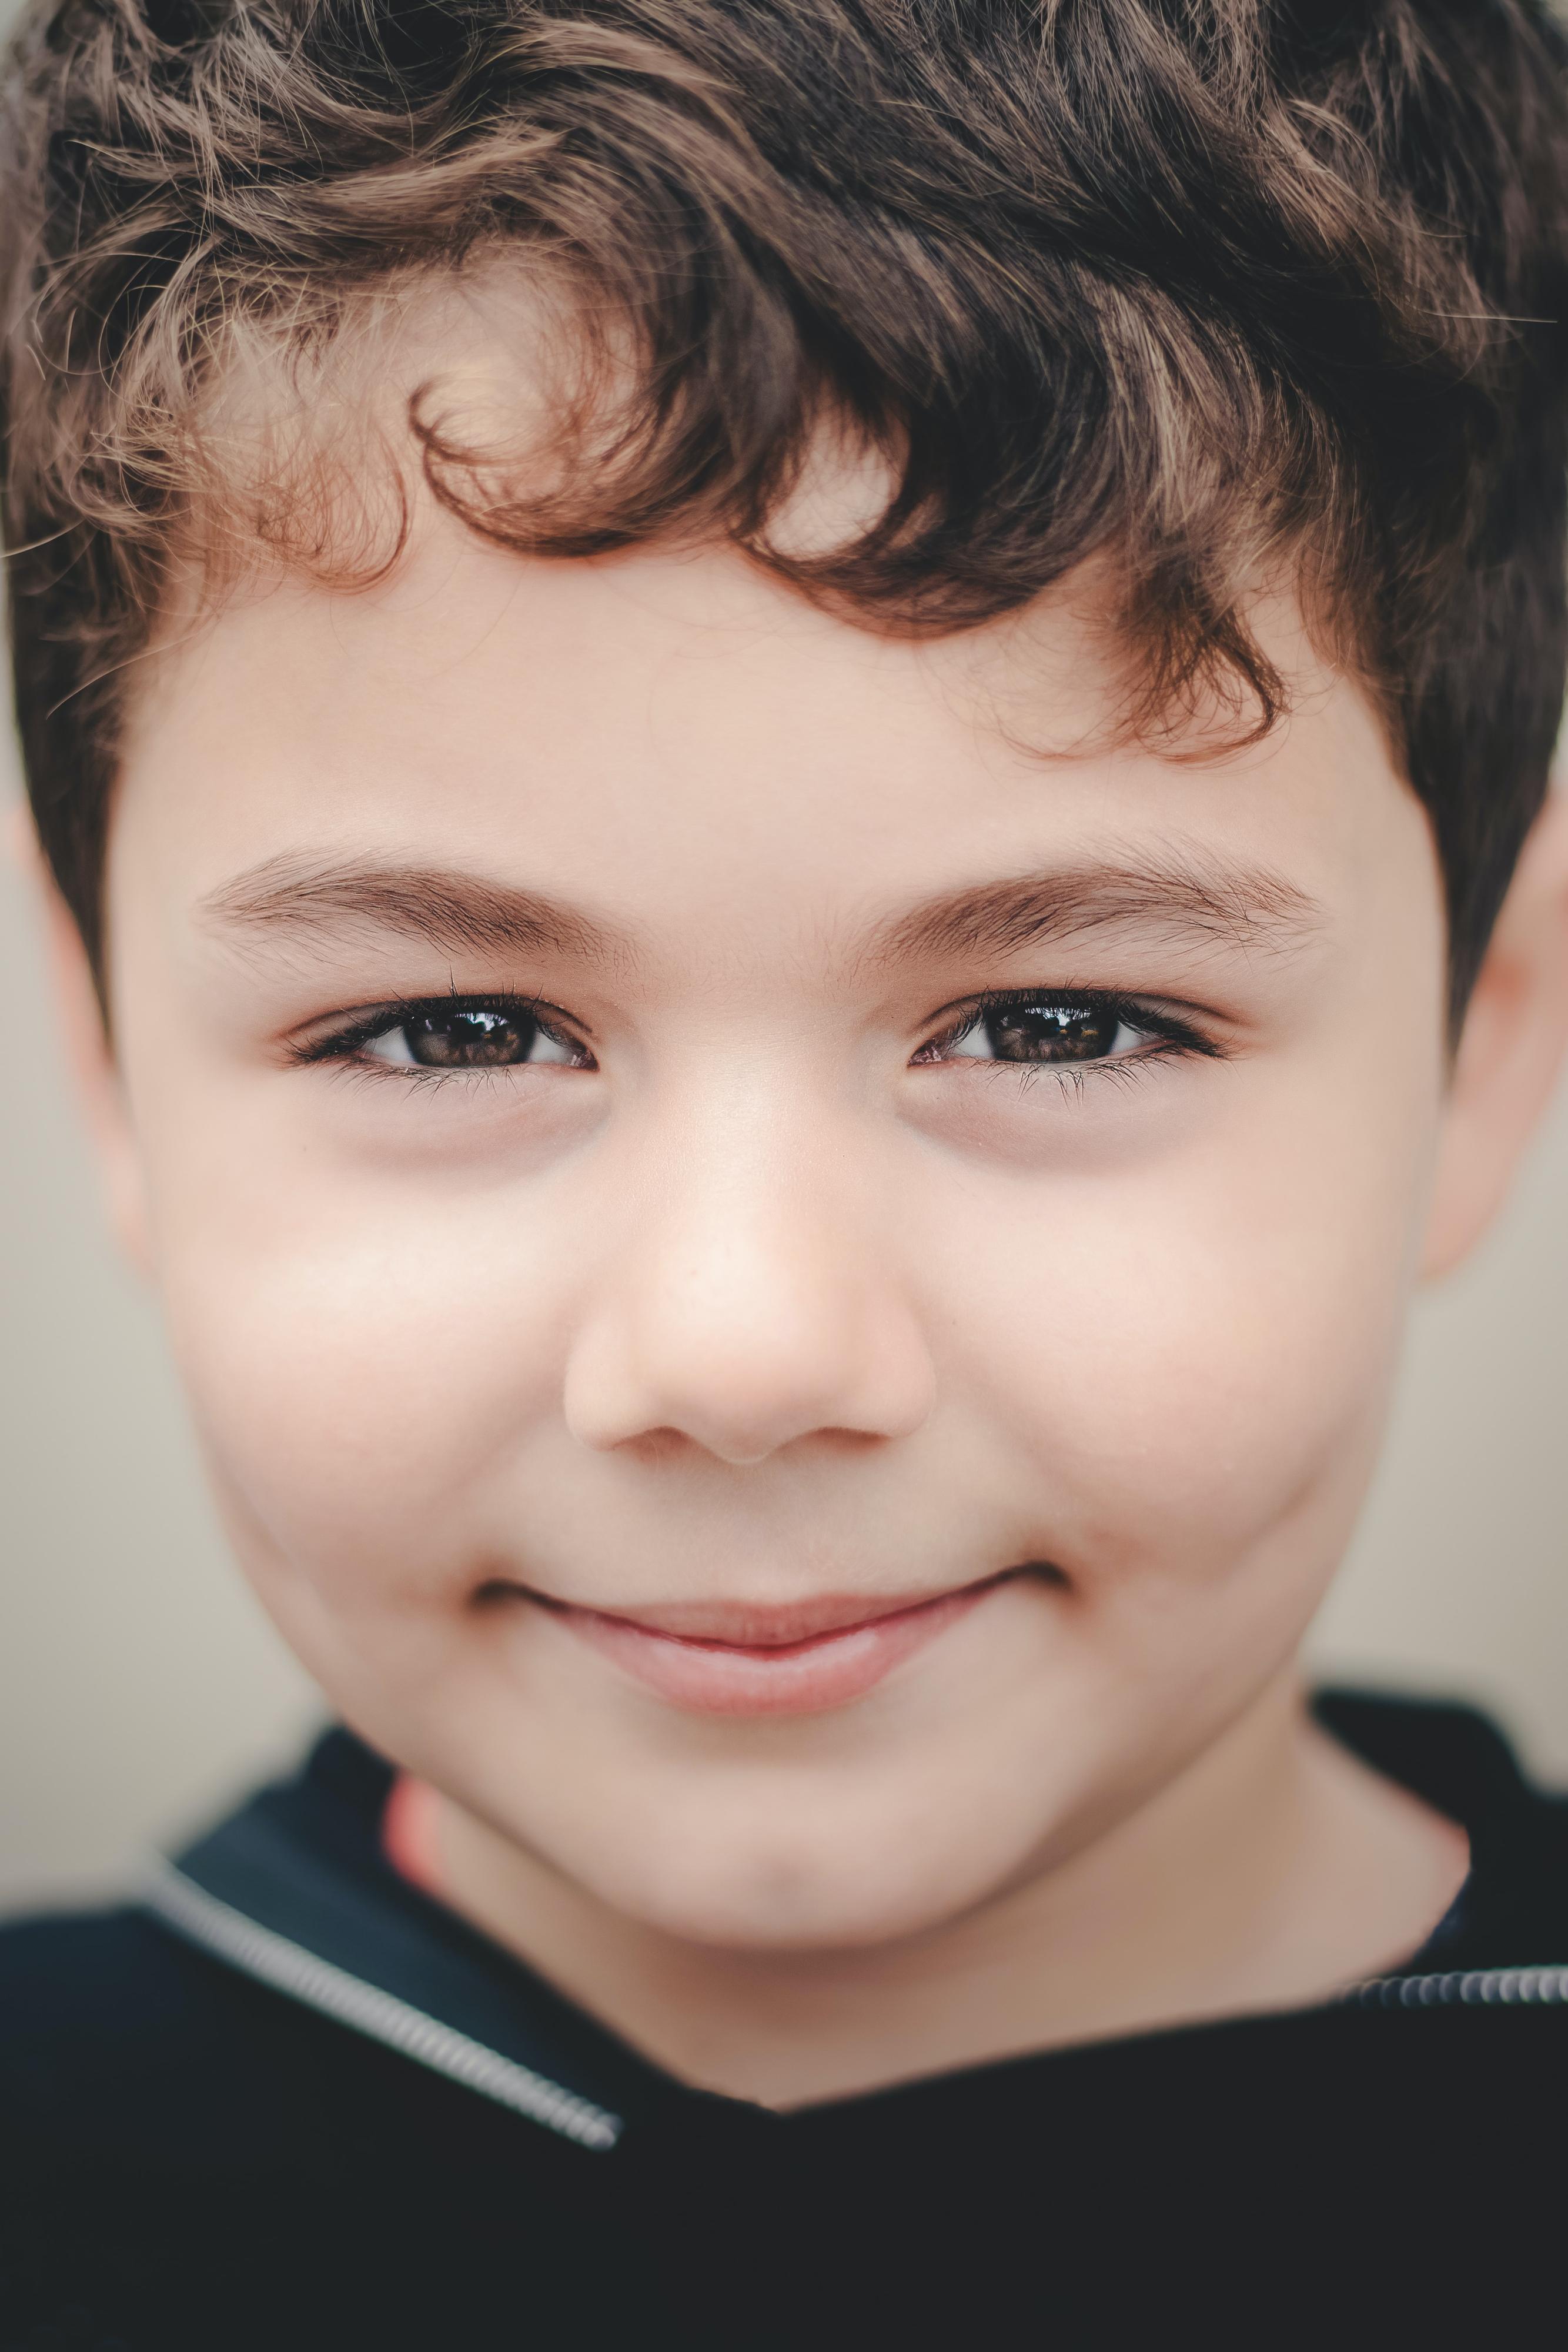 Close-up of a young boy with brown curly hair.